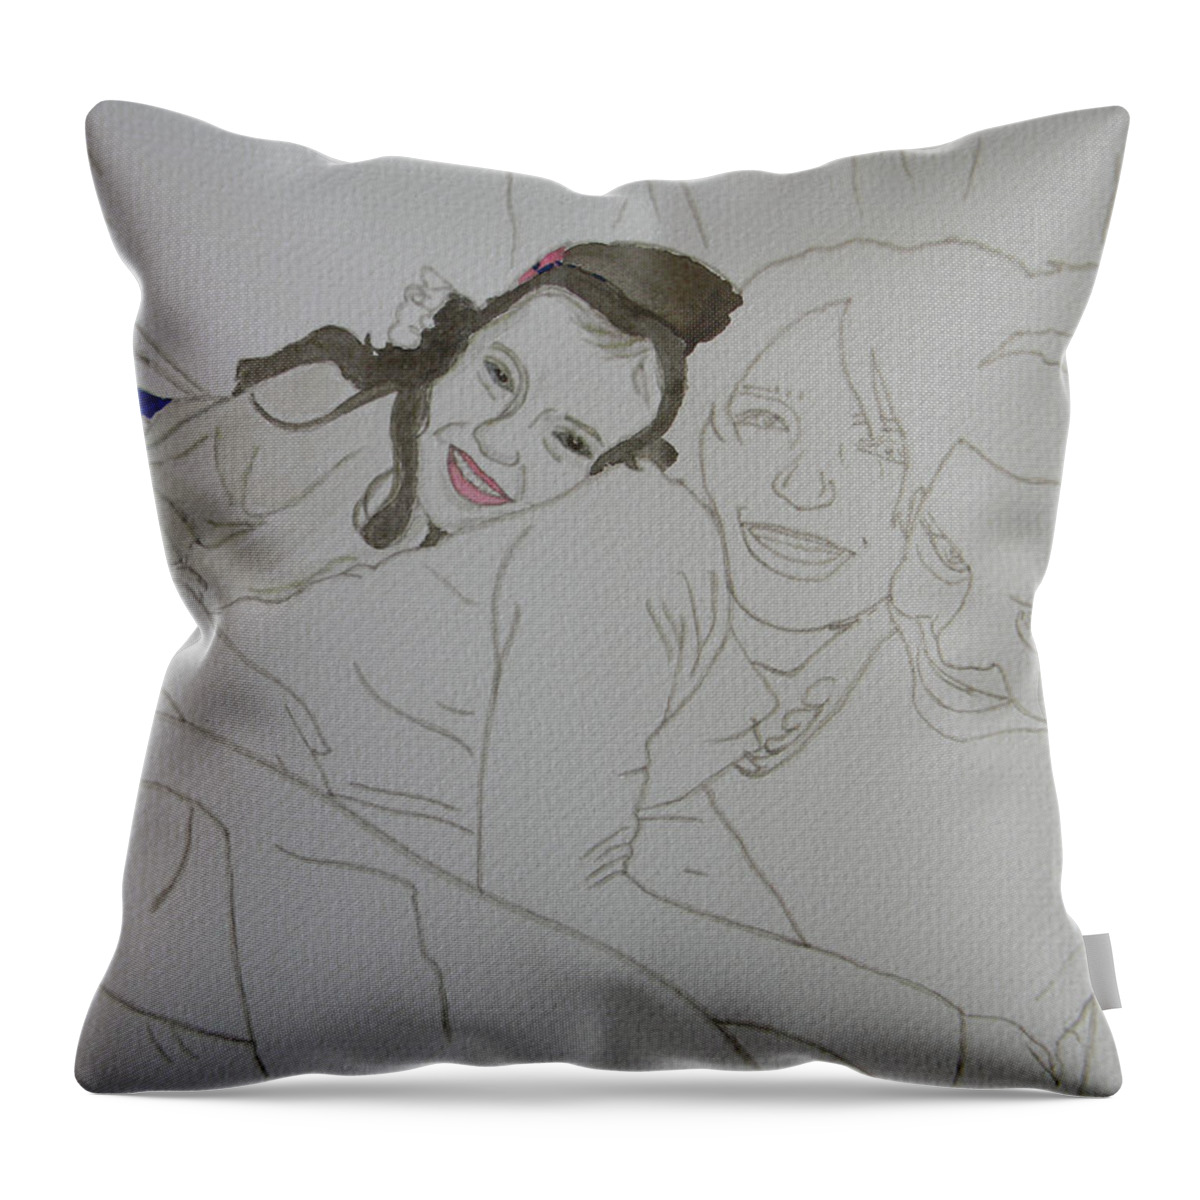 Girls Throw Pillow featuring the drawing Cousins 3 of 3 by Marwan George Khoury